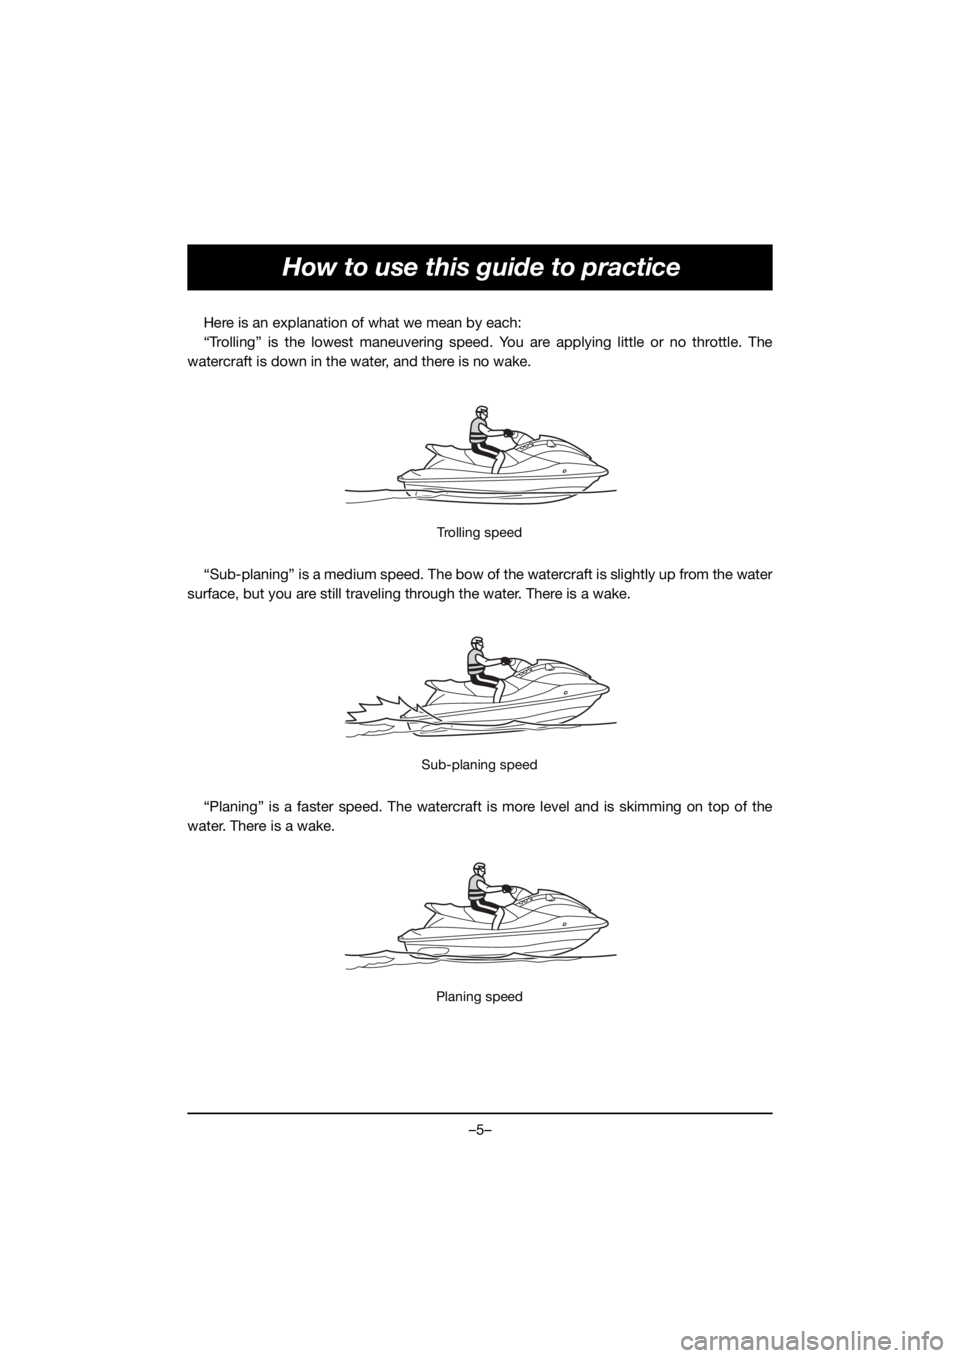 YAMAHA VX CRUISER HO 2020  Notices Demploi (in French) –5–
How to use this guide to practice
Here is an explanation of what we mean by each:
“Trolling” is the lowest maneuvering speed. You are applying little or no throttle. The
watercraft is down